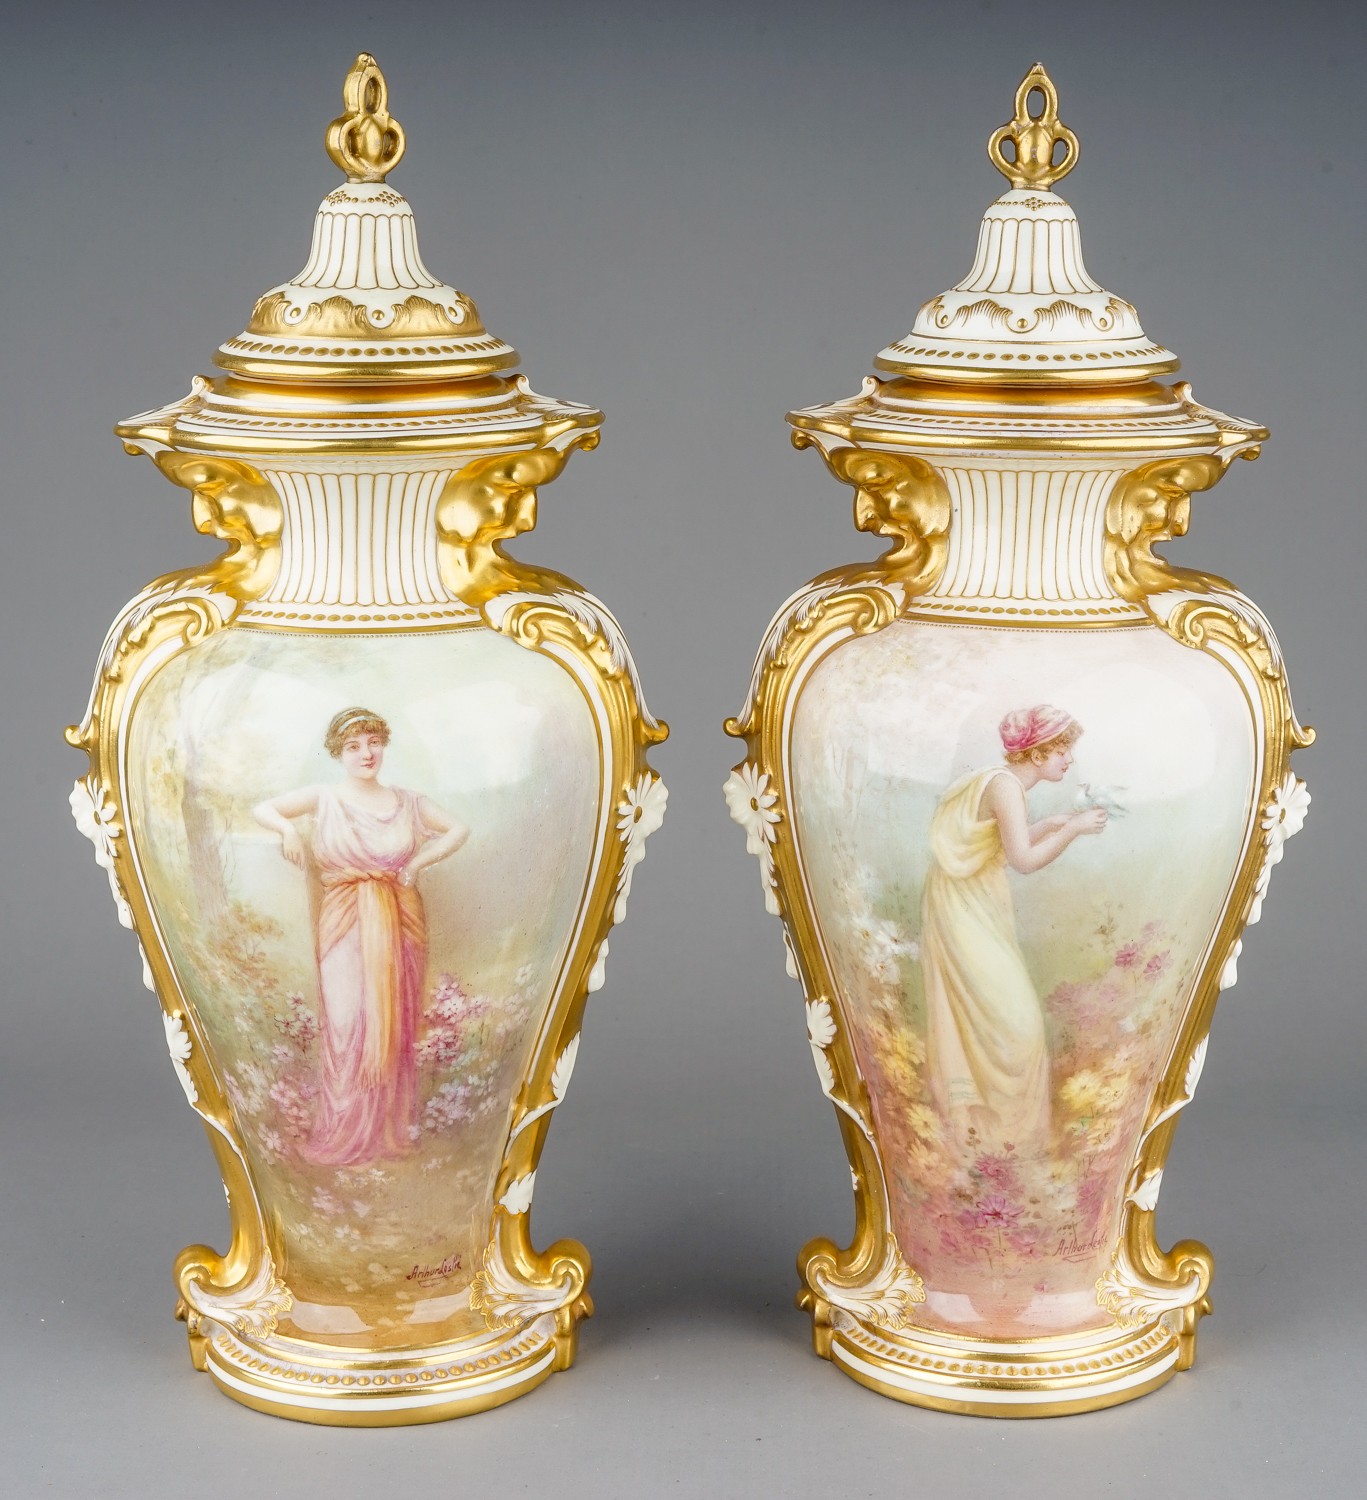 Arthur Leslie: a pair of early 20th Century Royal Doulton vases and covers, urn shaped bodies